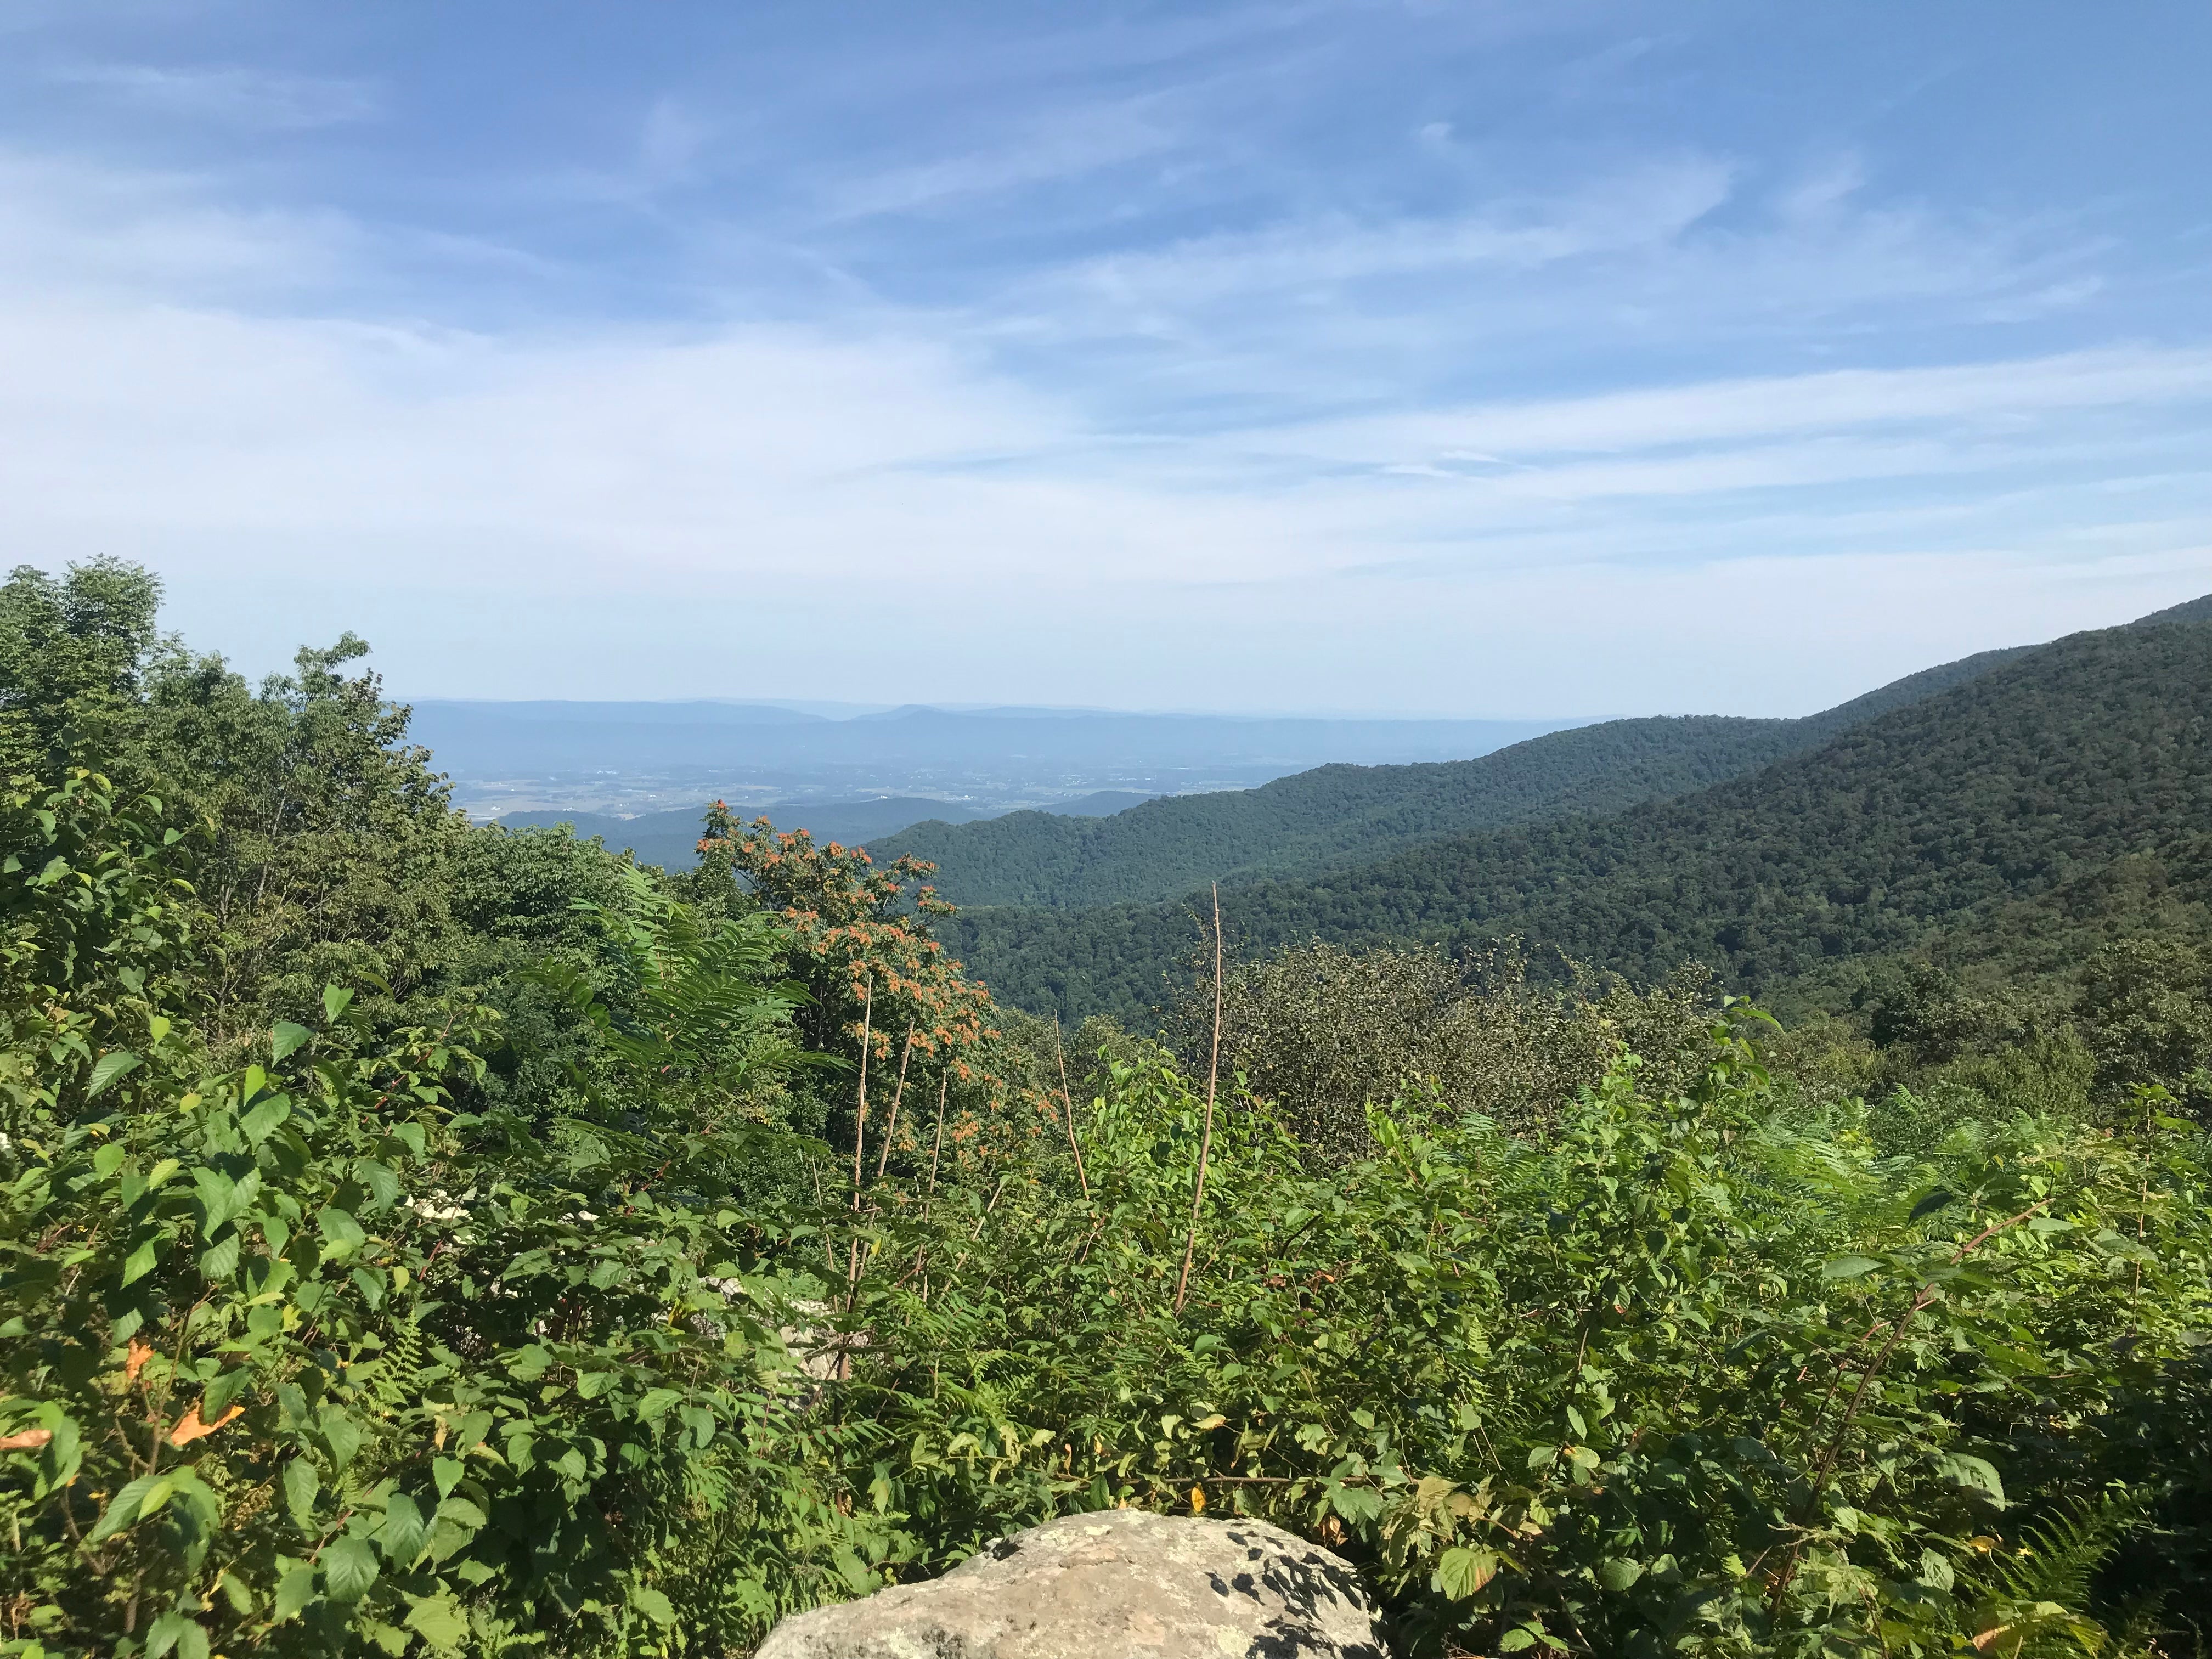 View from the stretch of Appalachian Trail that’s behind the campground